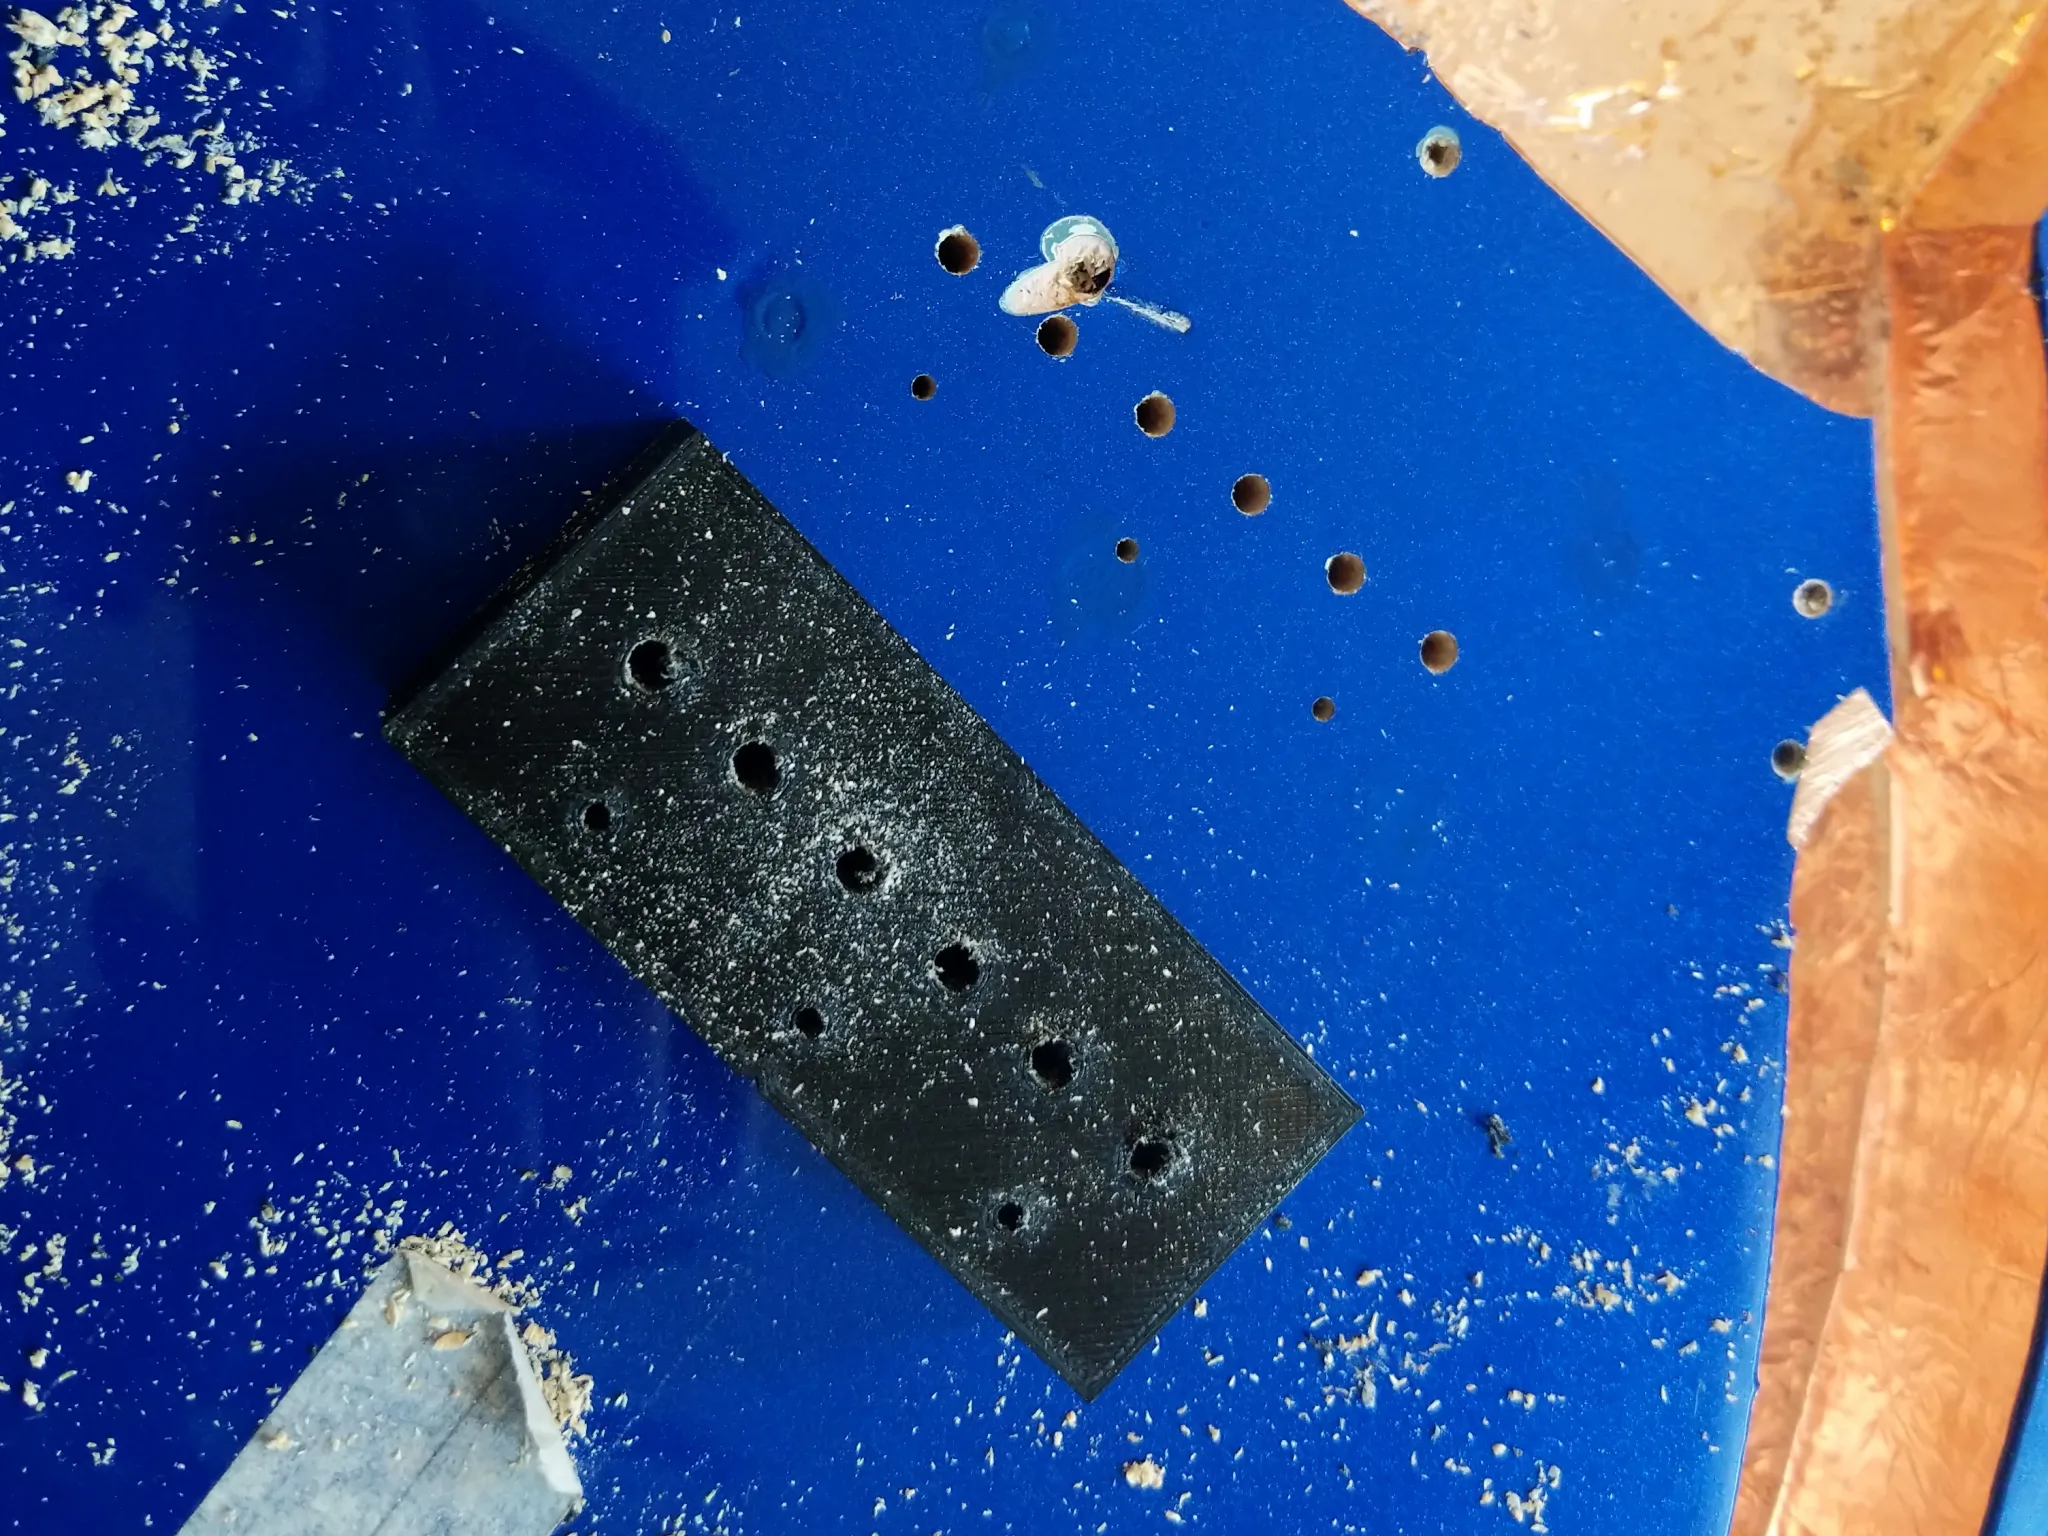 Nine straight holes in the top of the guitar, with a 3D-printed block next
to them. The block is about 15mm high and has the same pattern of holes